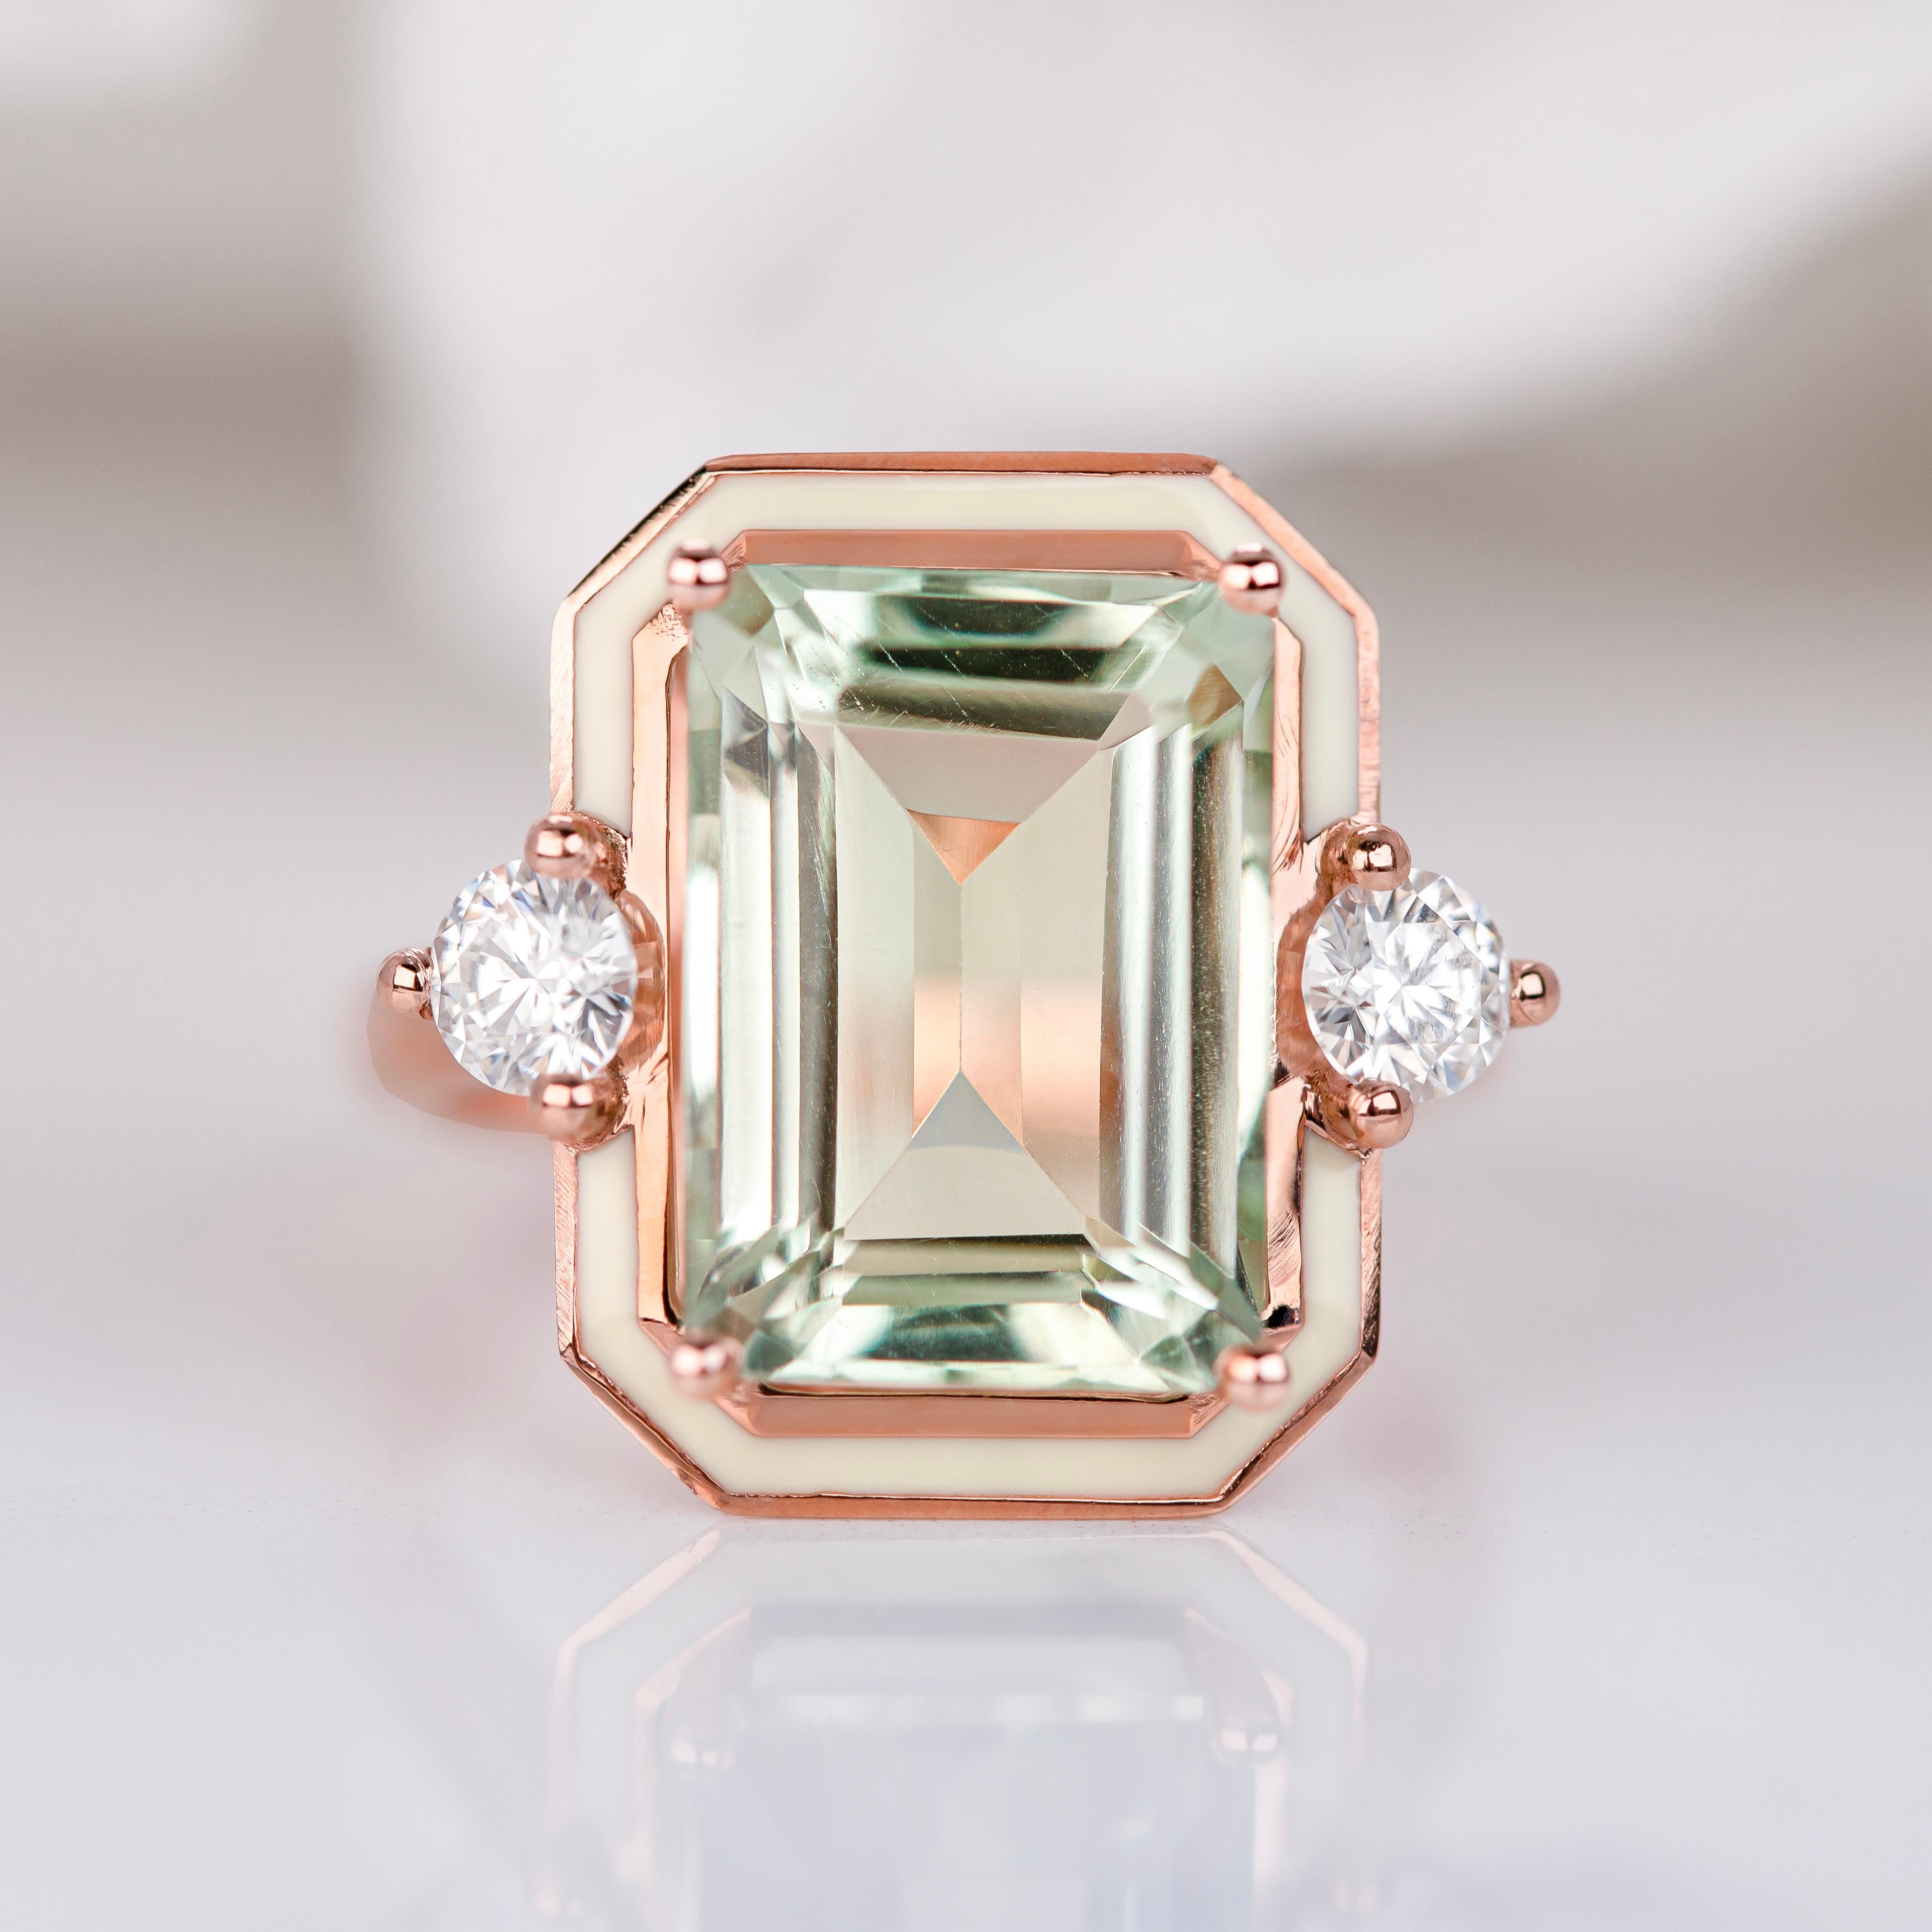 Art Deco Ring, Green Amethyst Stone and Moissanite Ring, 14K Gold Ring

This ring was made with quality materials and excellent handwork. I guarantee the quality assurance of my handwork and materials. It is vital for me that you are totally happy